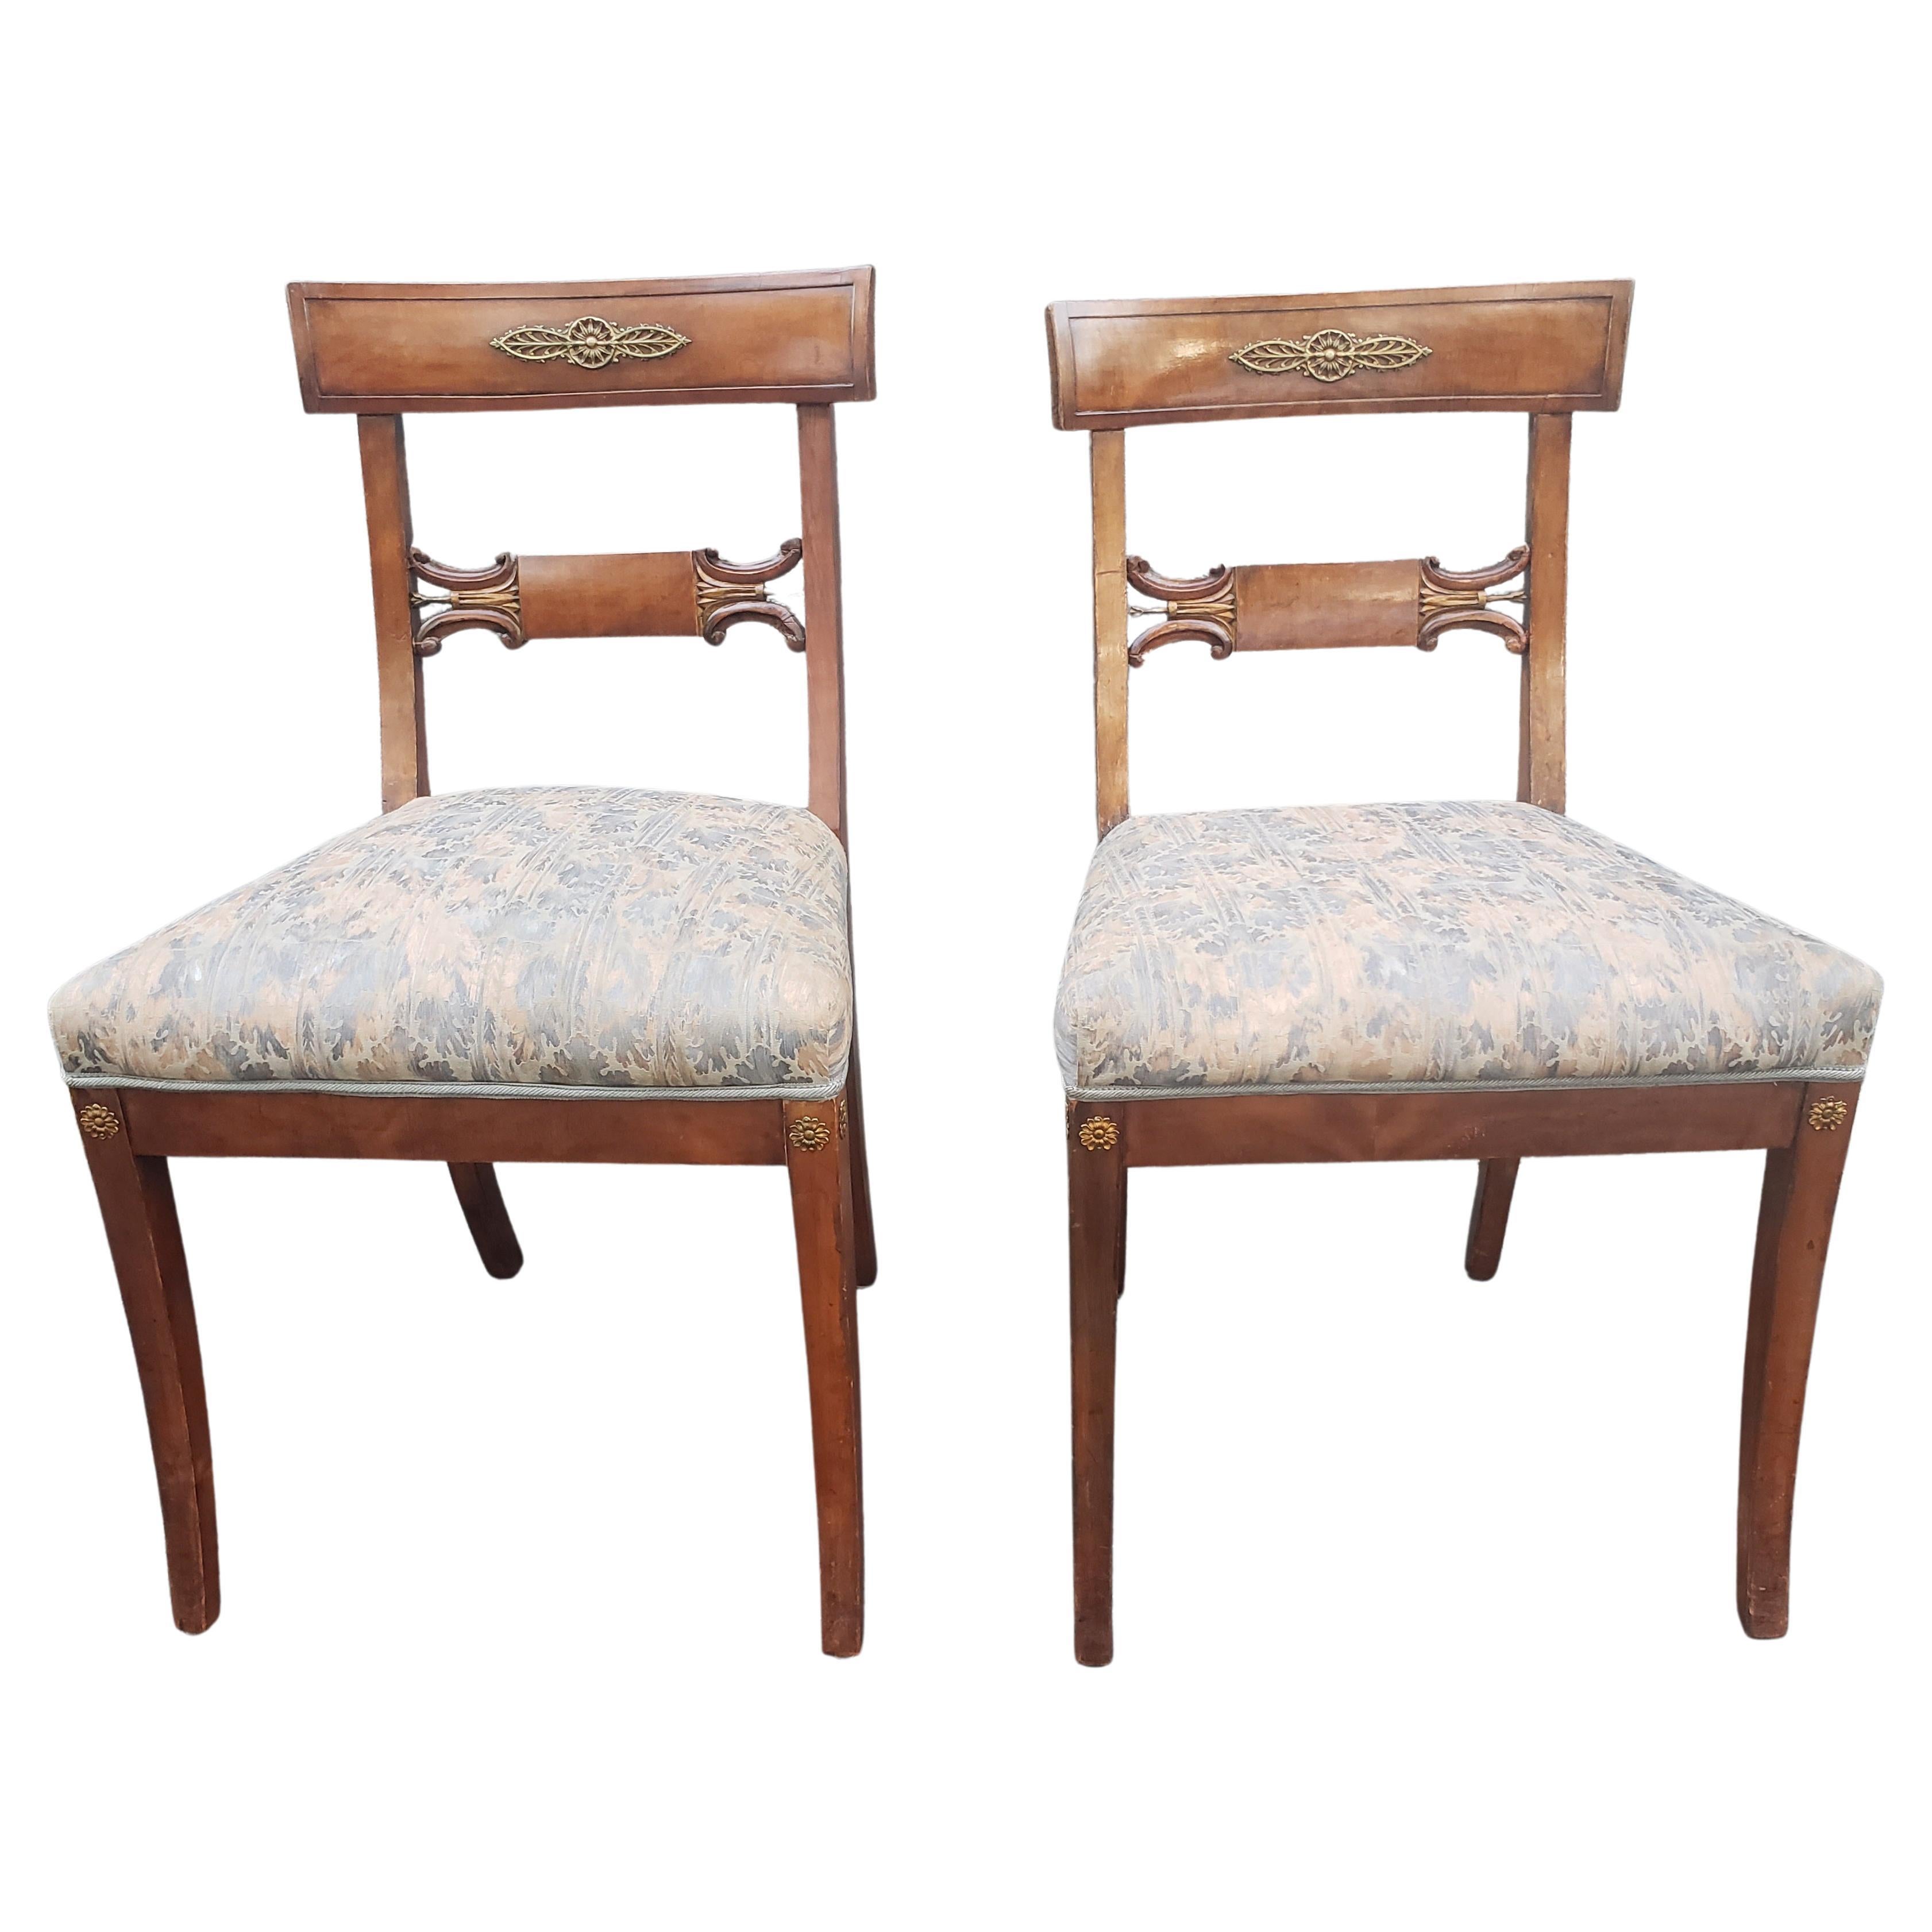 Pair of 19th century Empire Ormolu Mounted, Partial Gilt Mahogany & Upholstered side Chairs. 
Measure 19